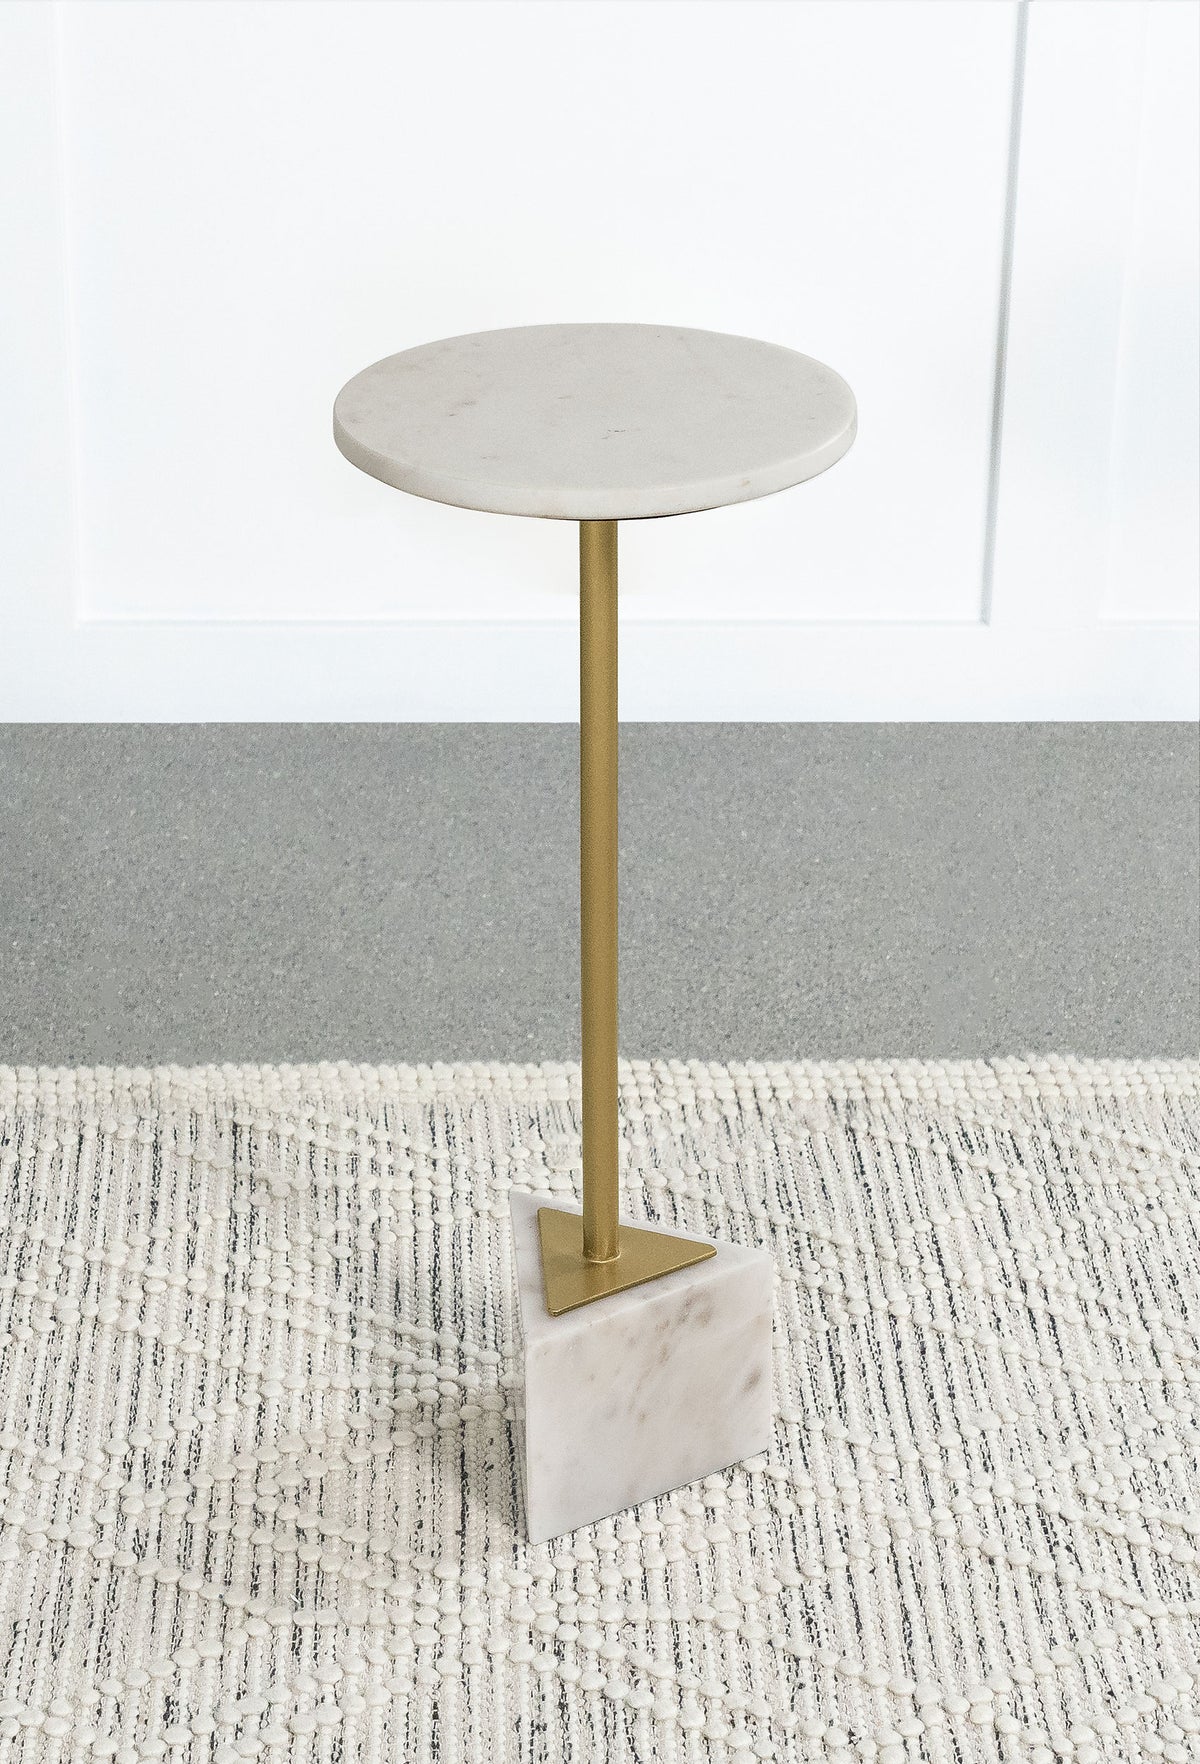 Fulcher Round Metal Side Table White and Gold Fulcher Round Metal Side Table White and Gold Half Price Furniture